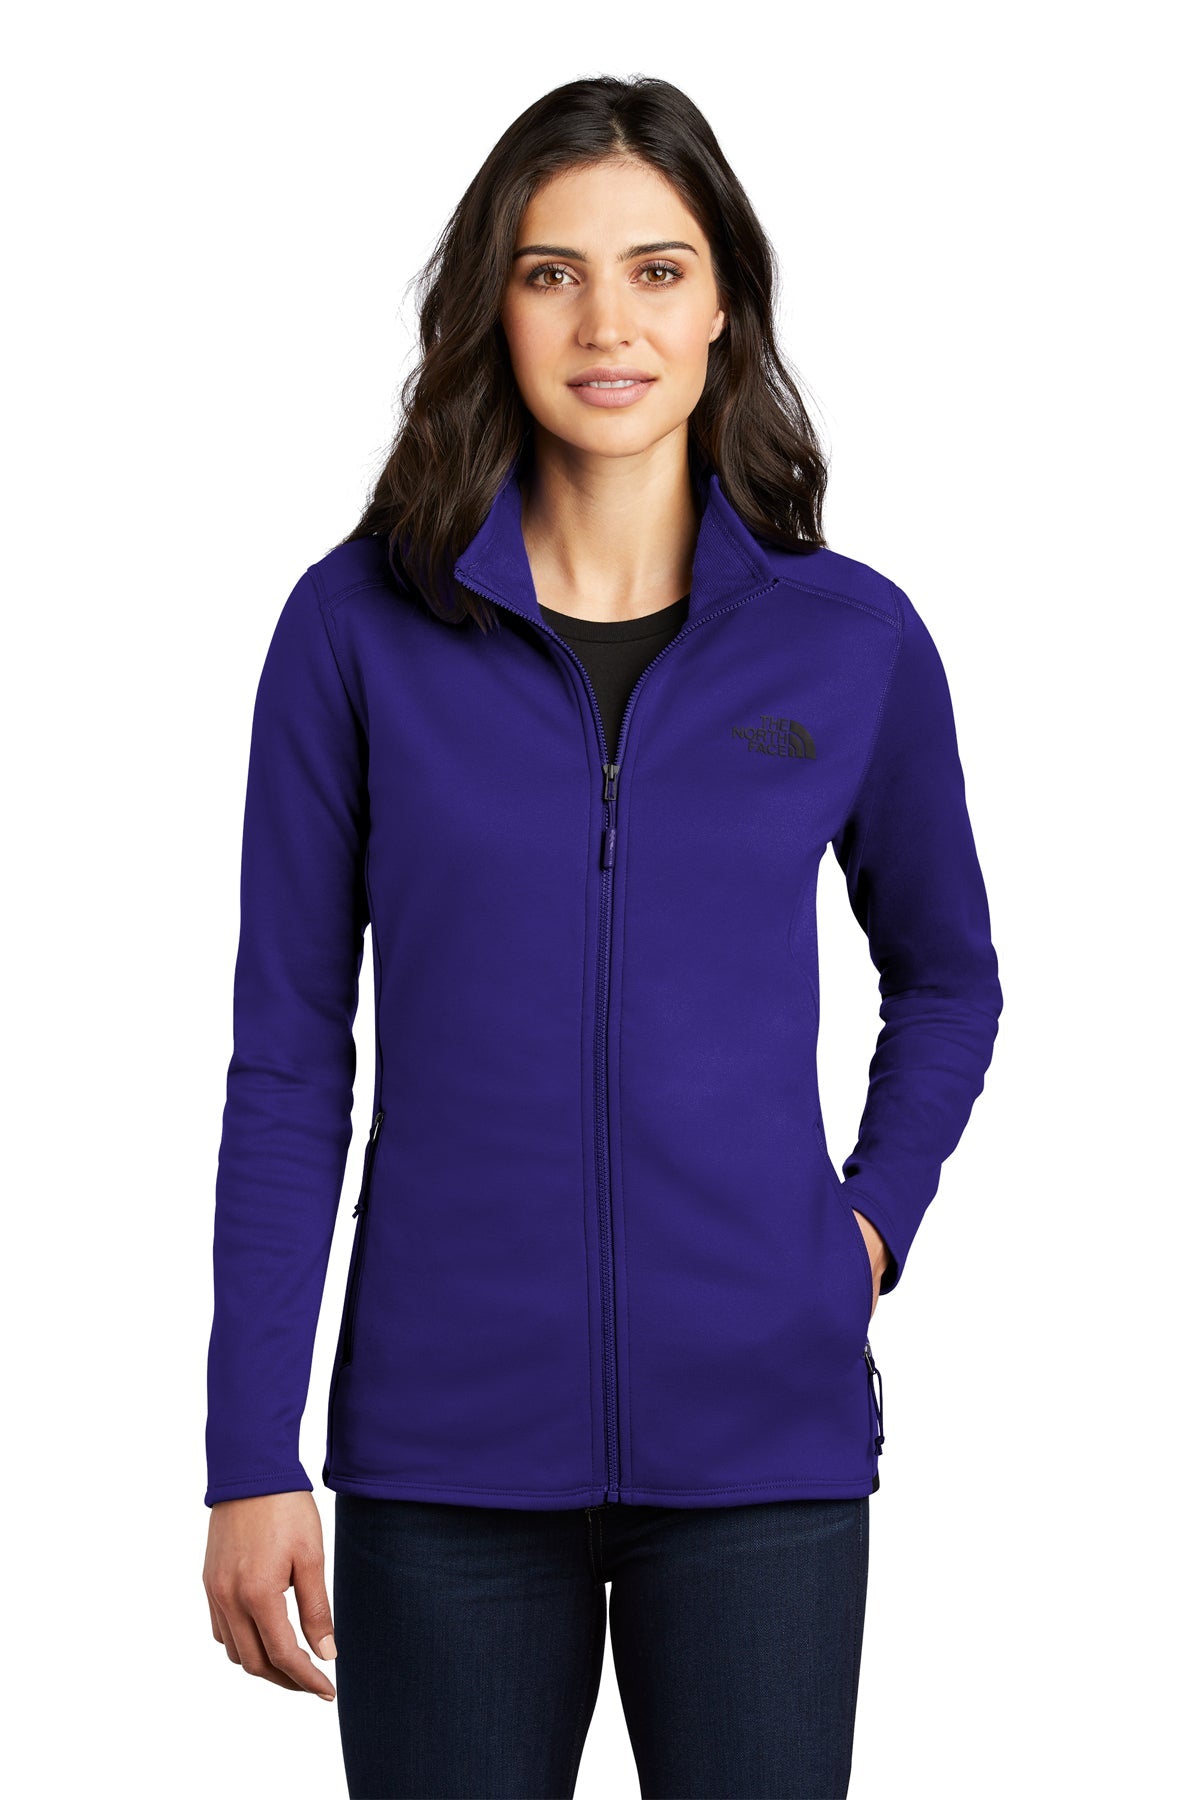 Wilford NF0A7V62  The North Face ® Ladies Skyline Full-Zip Fleece Jacket